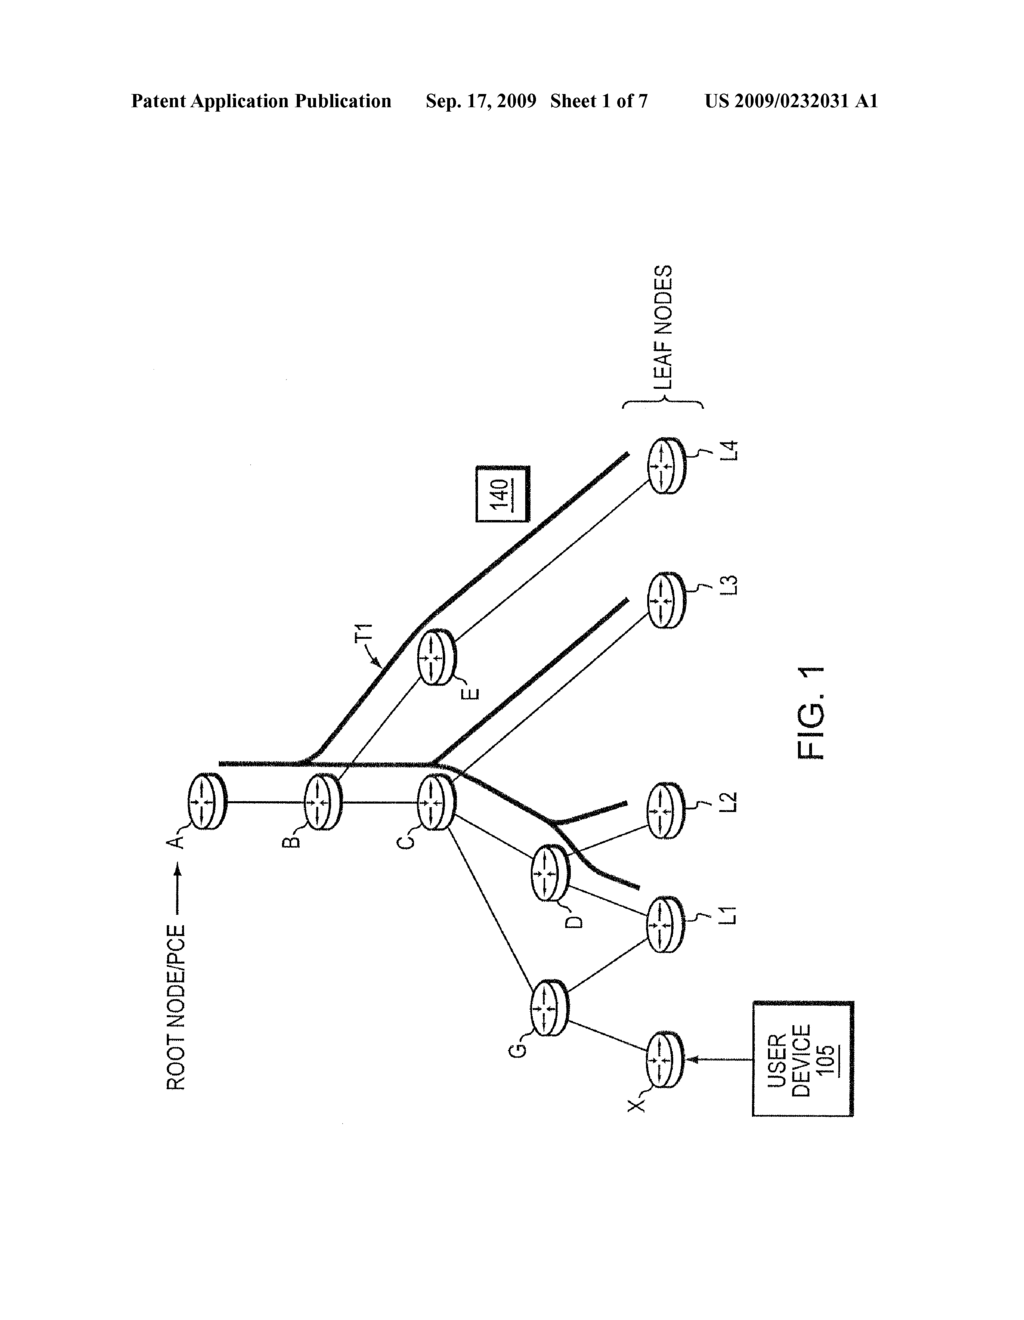 RECEIVER-BASED CONSTRUCTION OF POINT-TO-MULTIPOINT TREES USING PATH COMPUTATION ELEMENTS IN A COMPUTER NETWORK - diagram, schematic, and image 02